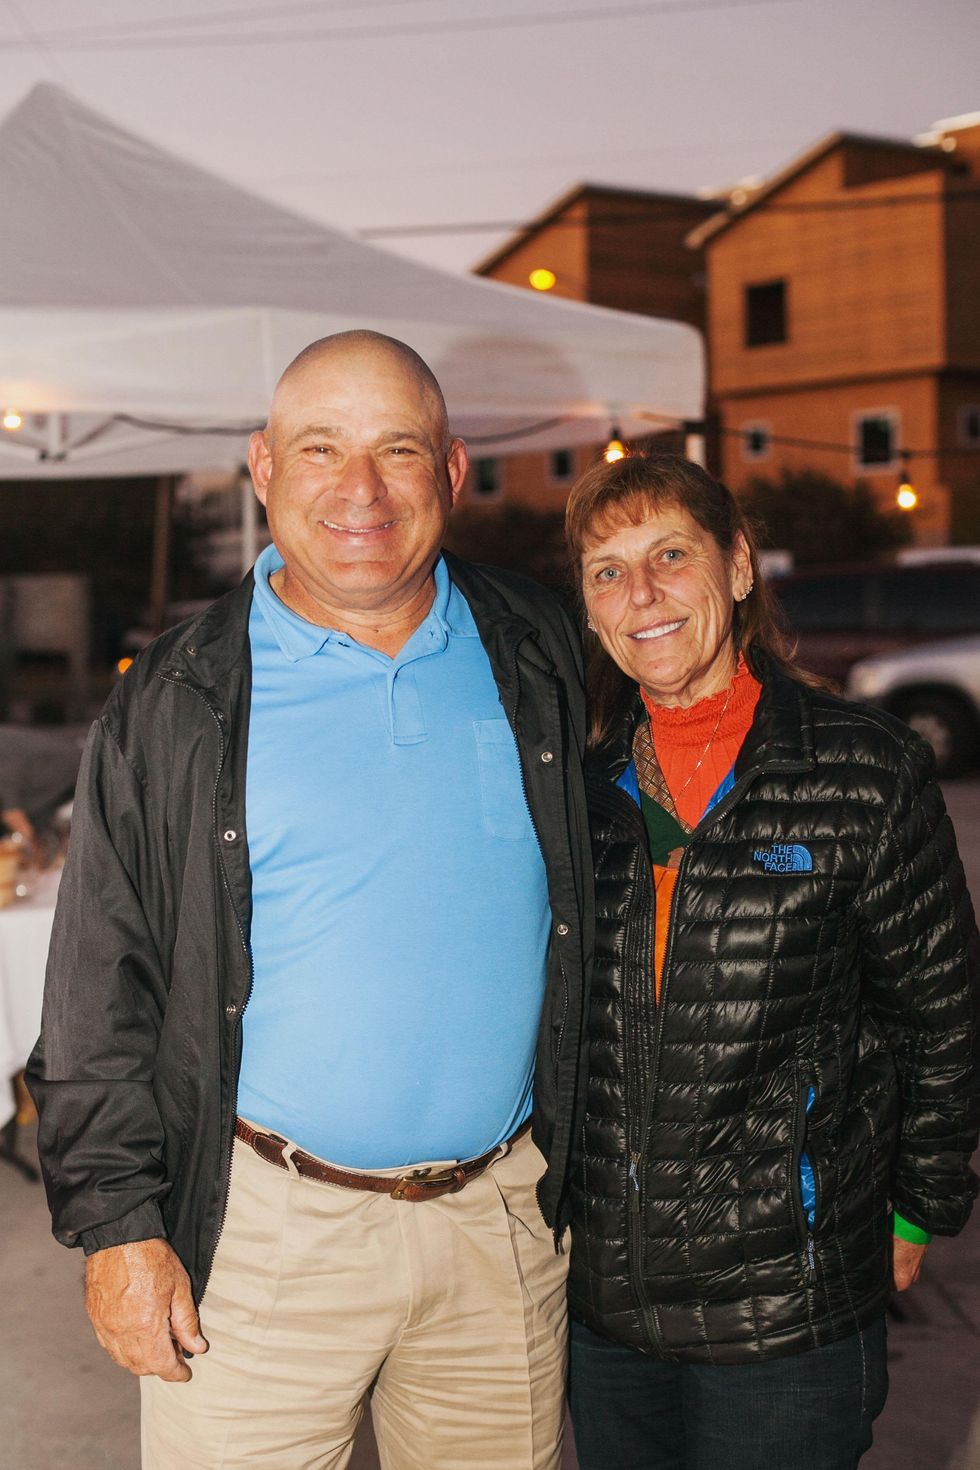 25 Mike and Theresa Atkinson at the Urban Harvest 10th anniversary dinner November 2014